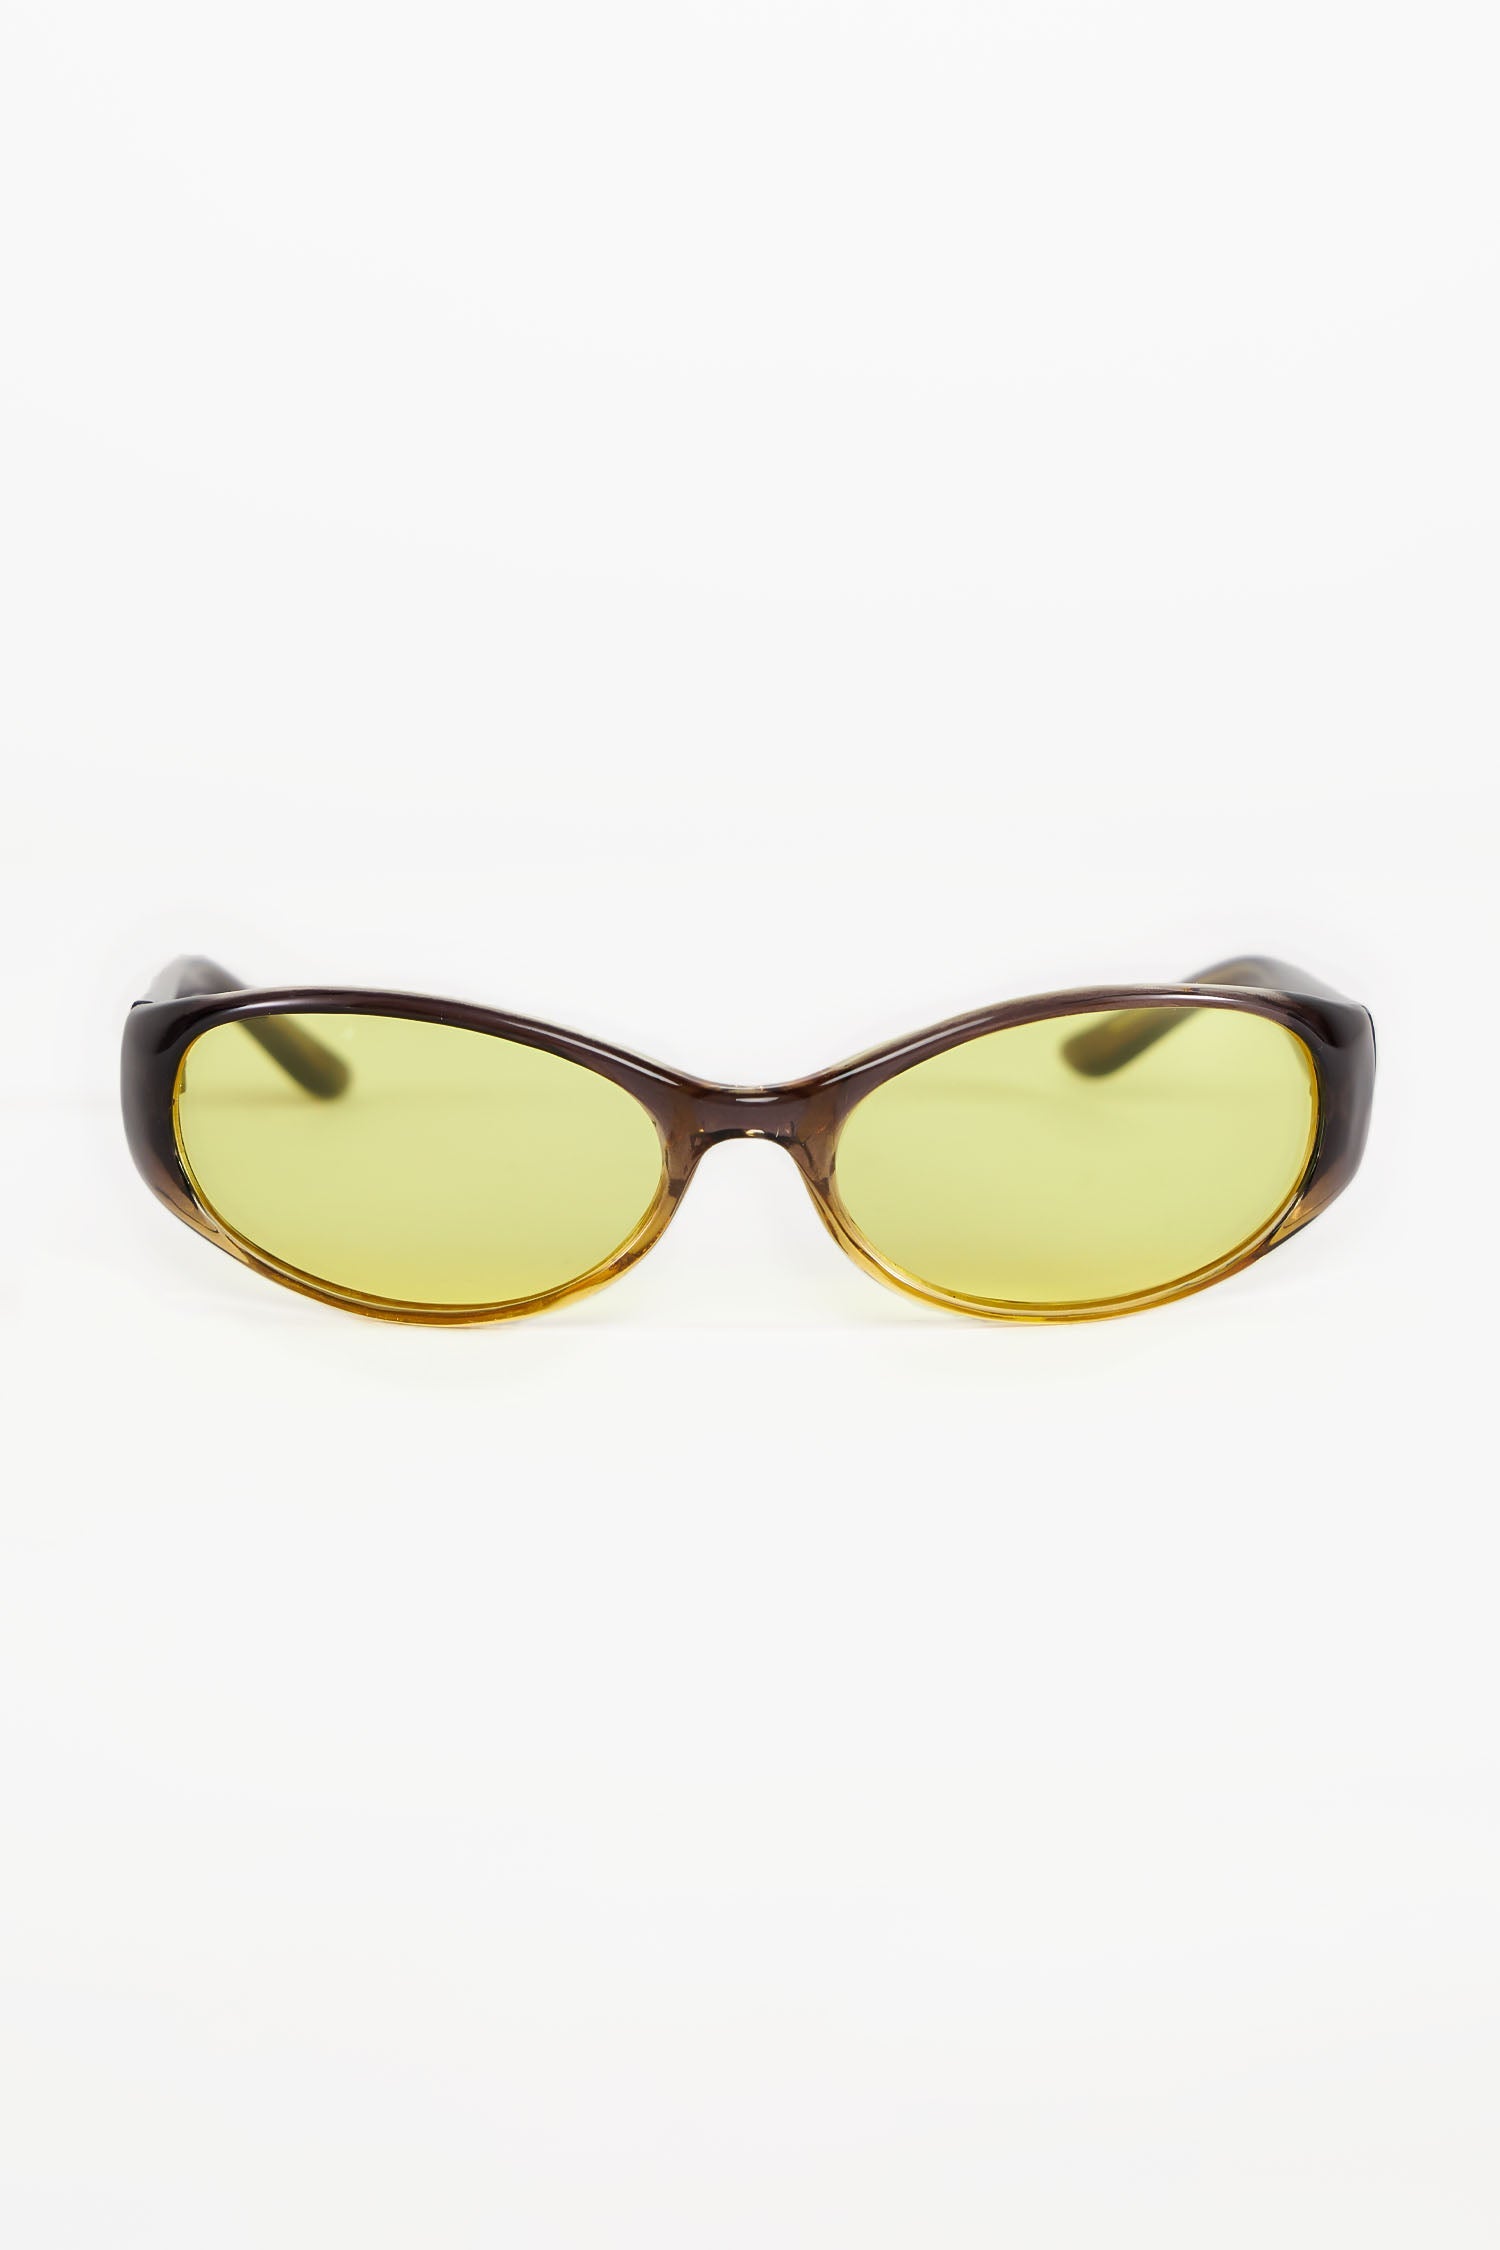 Los Angeles Apparel | Pop Curve Sunglasses for Women in Smoke